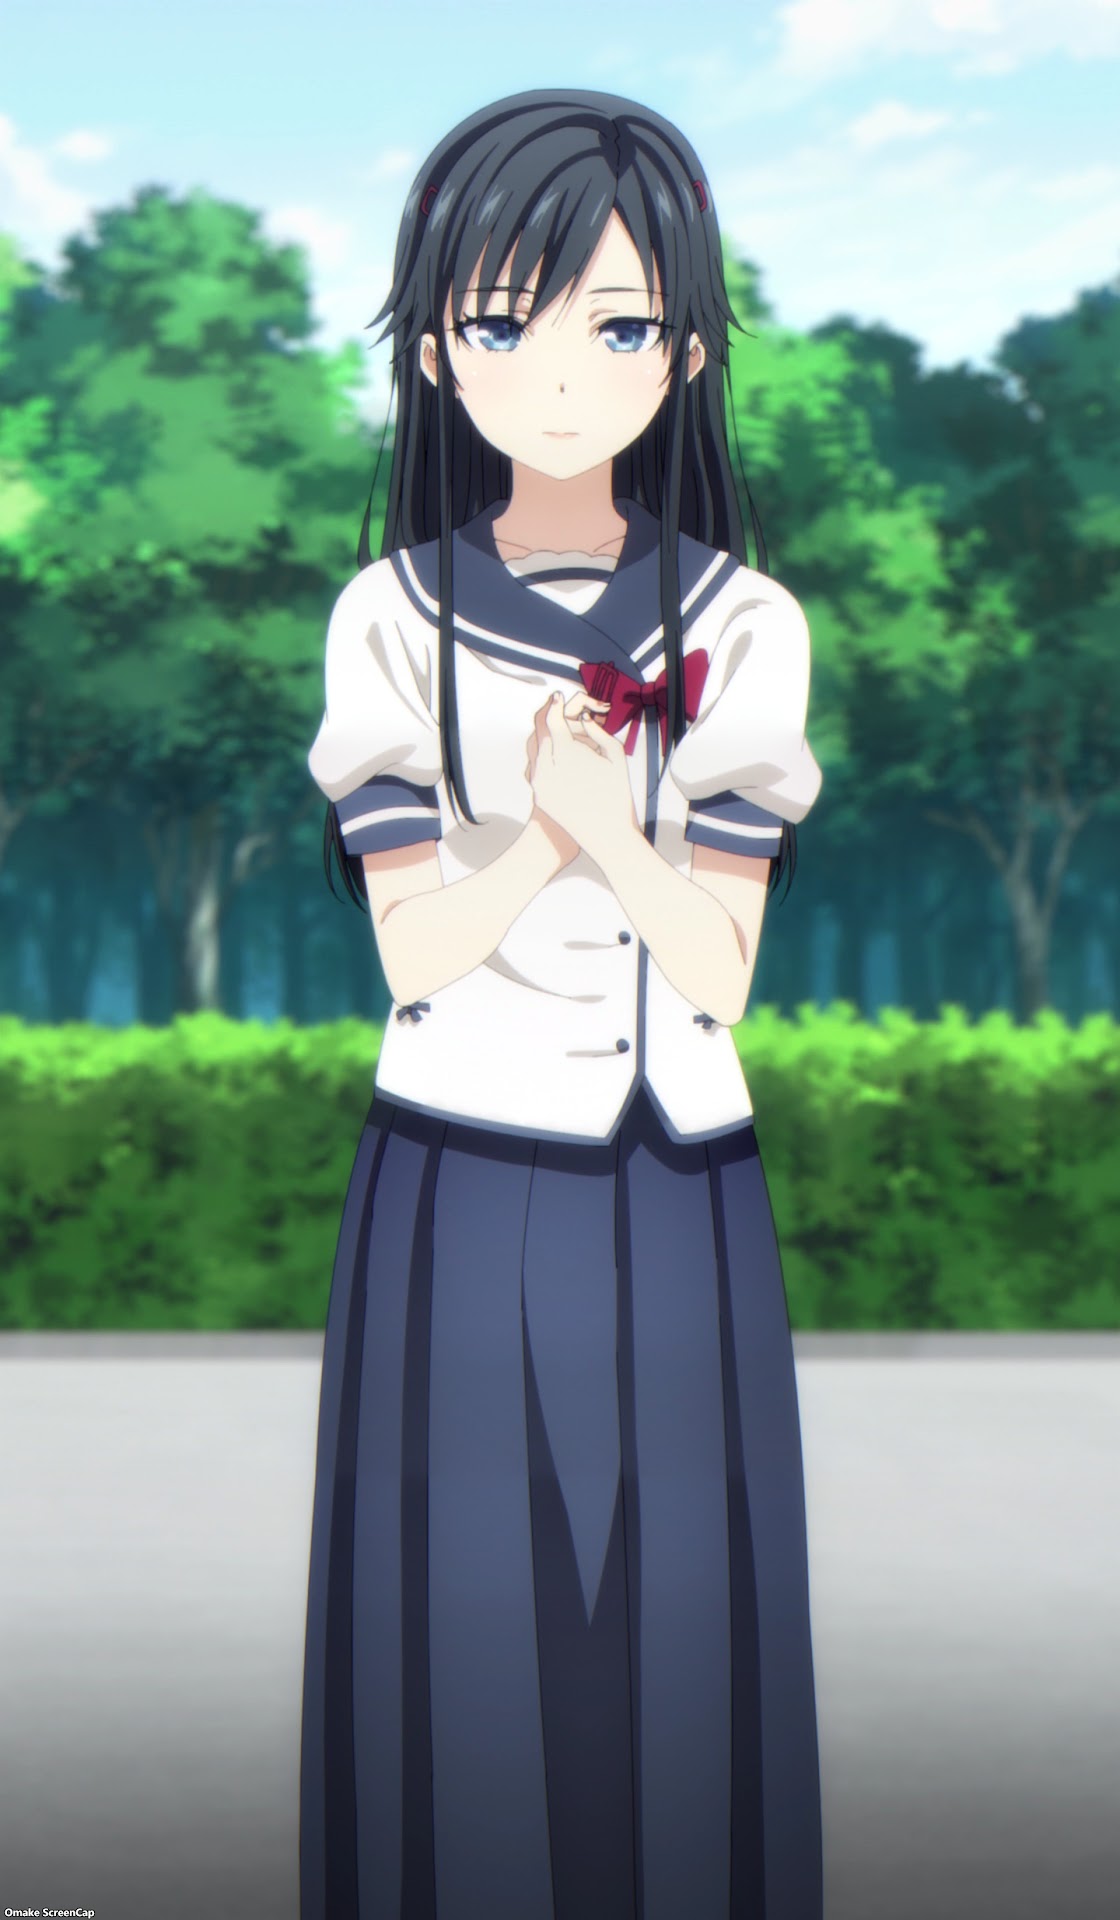 anime fyi — If you kept up with Oresuki from 2019 the OVA is